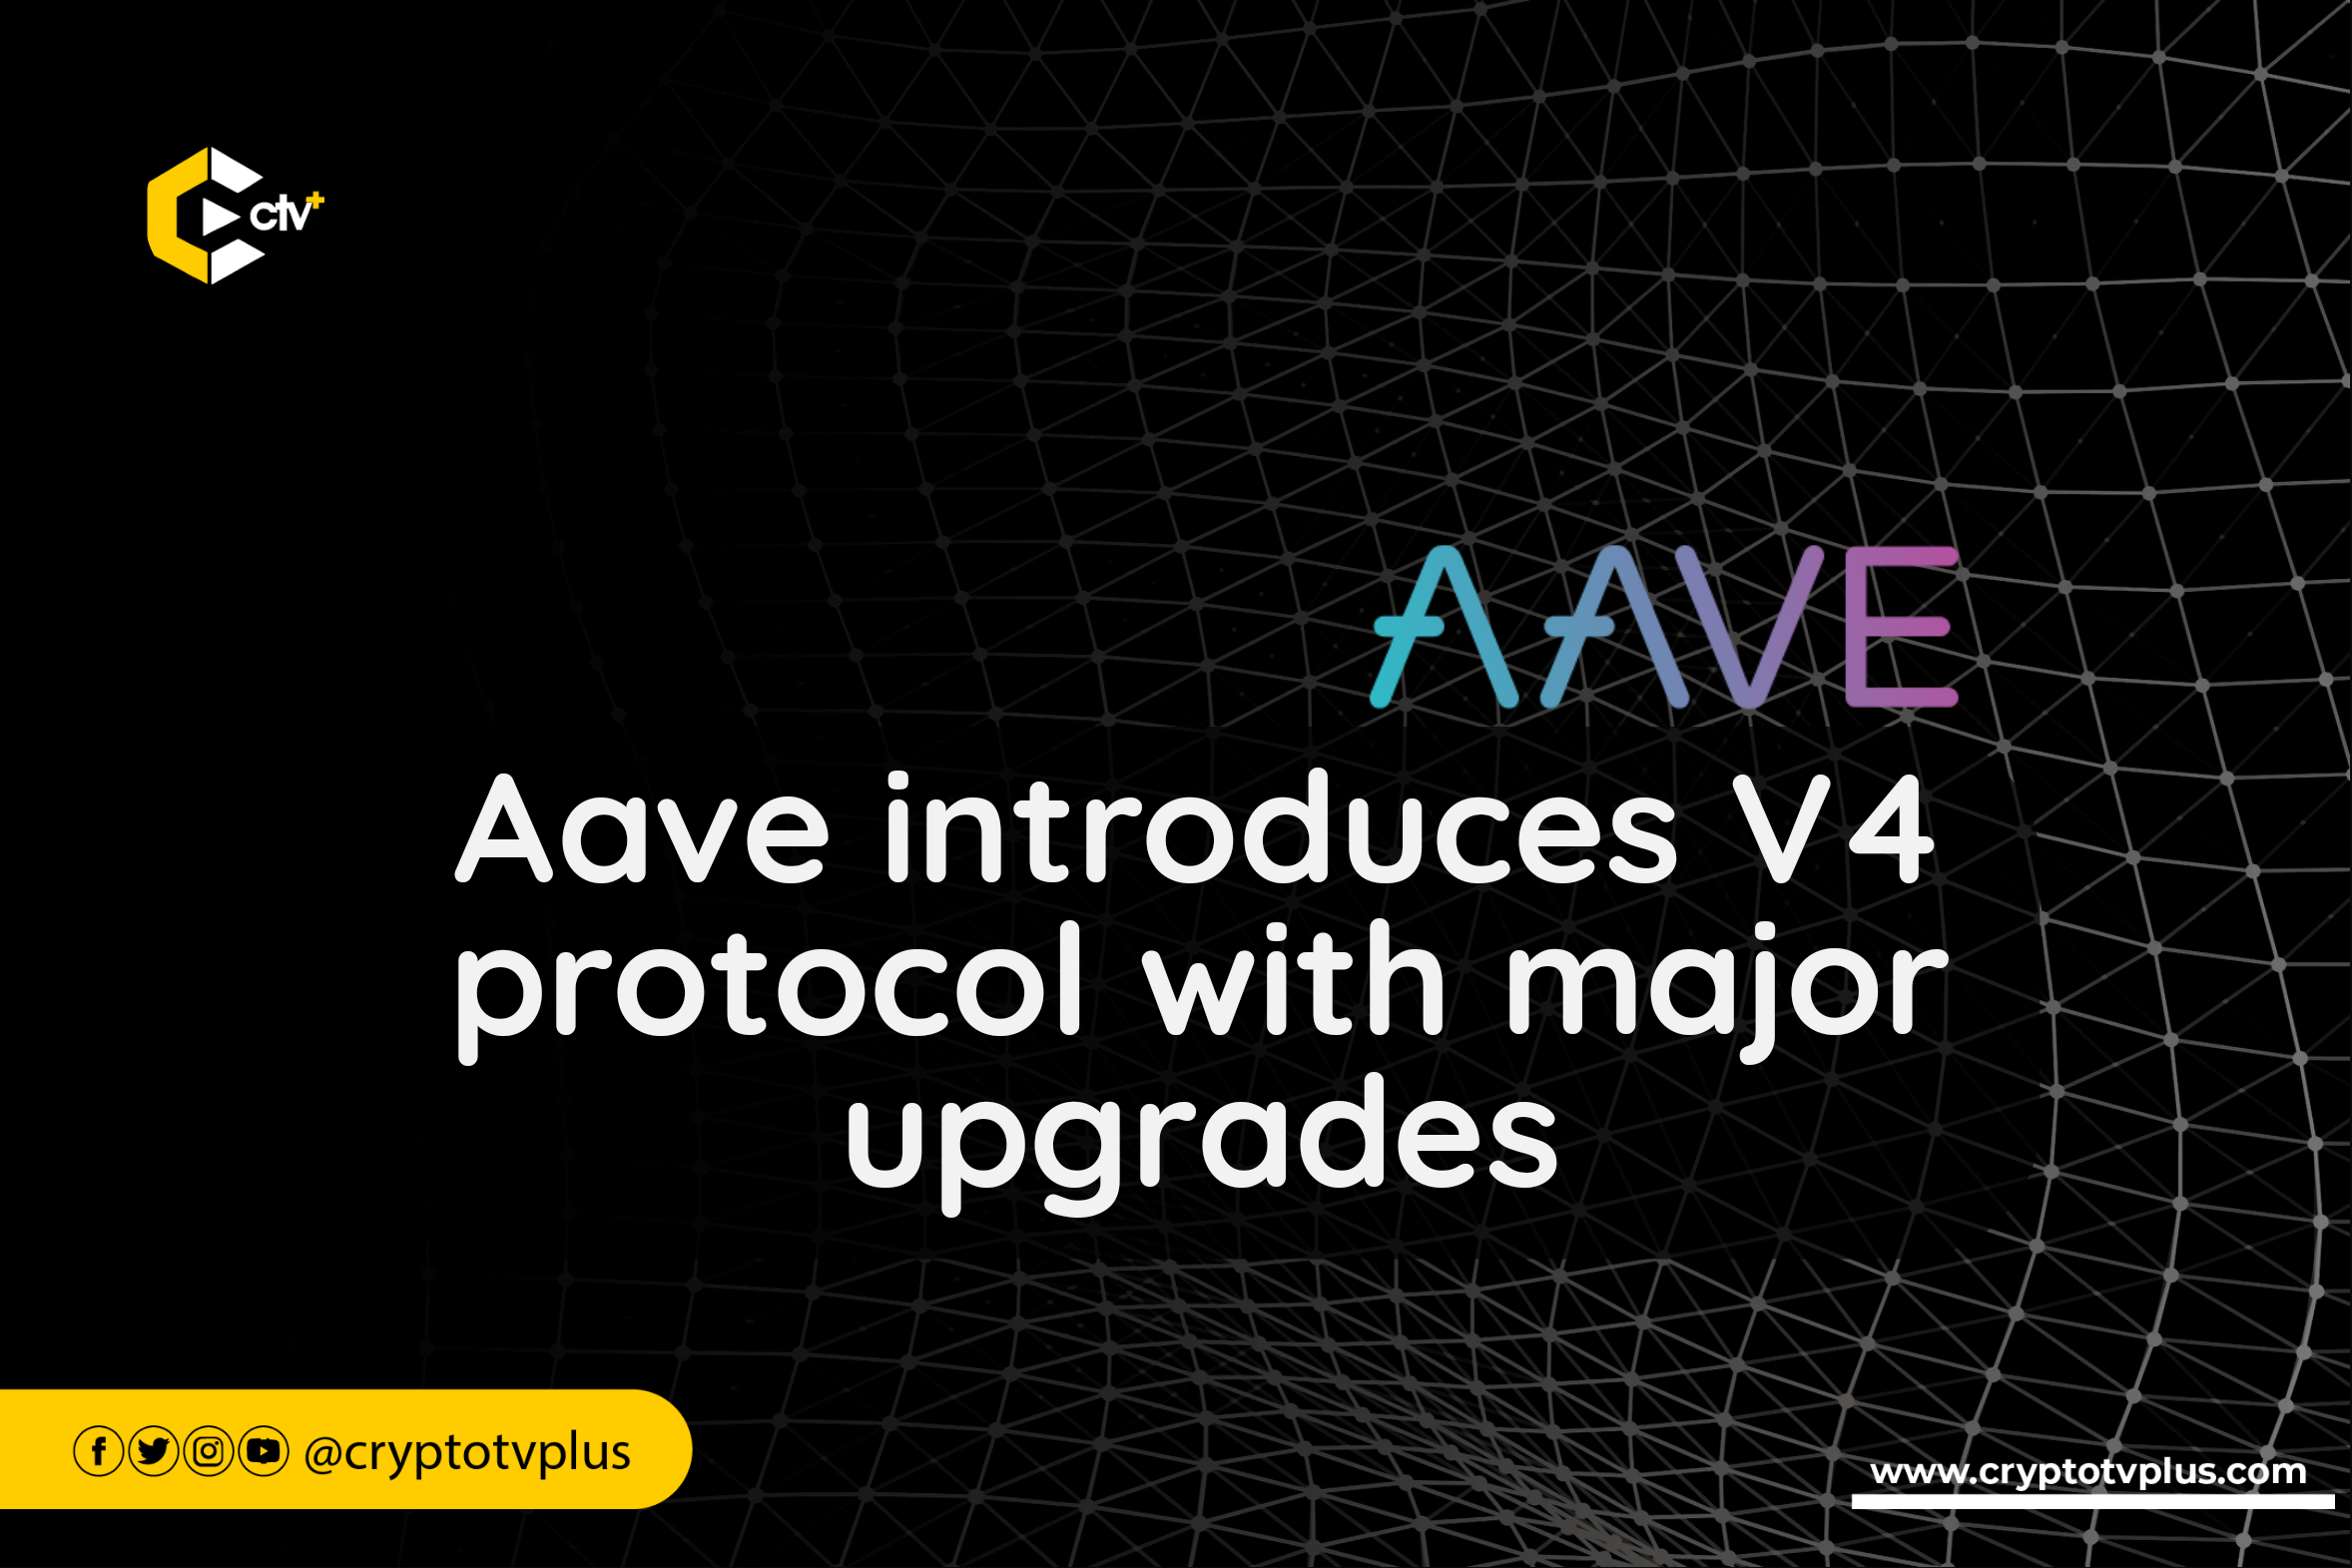 Aave has launched its V4 protocol, featuring significant upgrades to enhance user experience and security, marking a major step forward in DeFi.